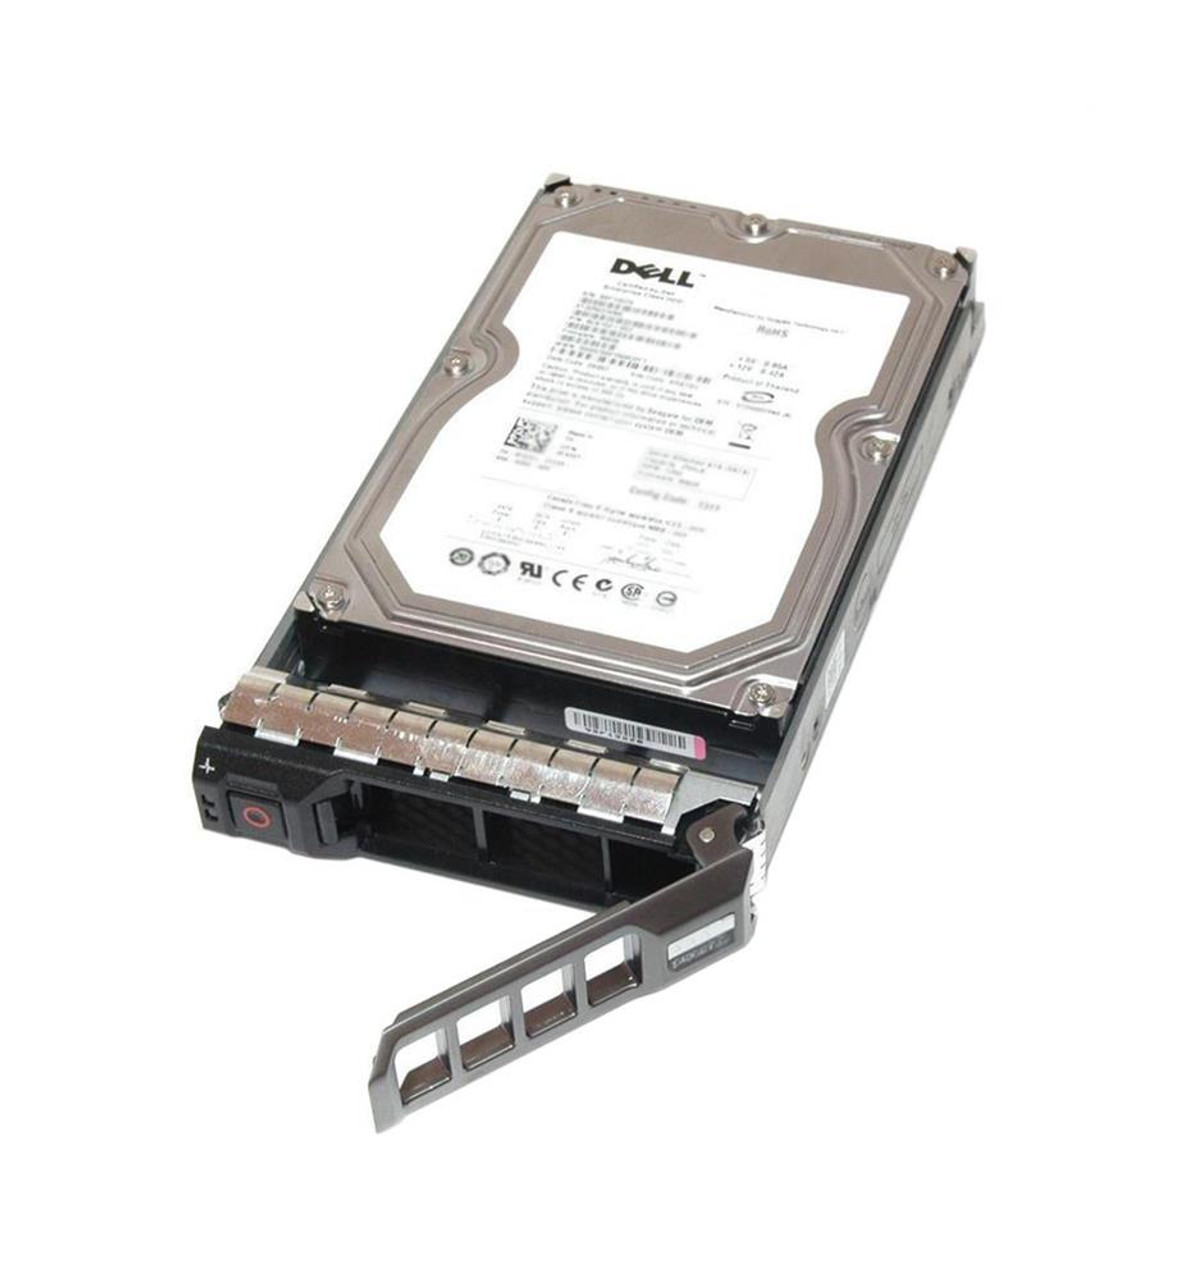 PRDN7 Dell 8TB 7200RPM SAS 12Gbps Nearline Hot Swap (512e) 3.5-inch Internal Hard Drive with Tray